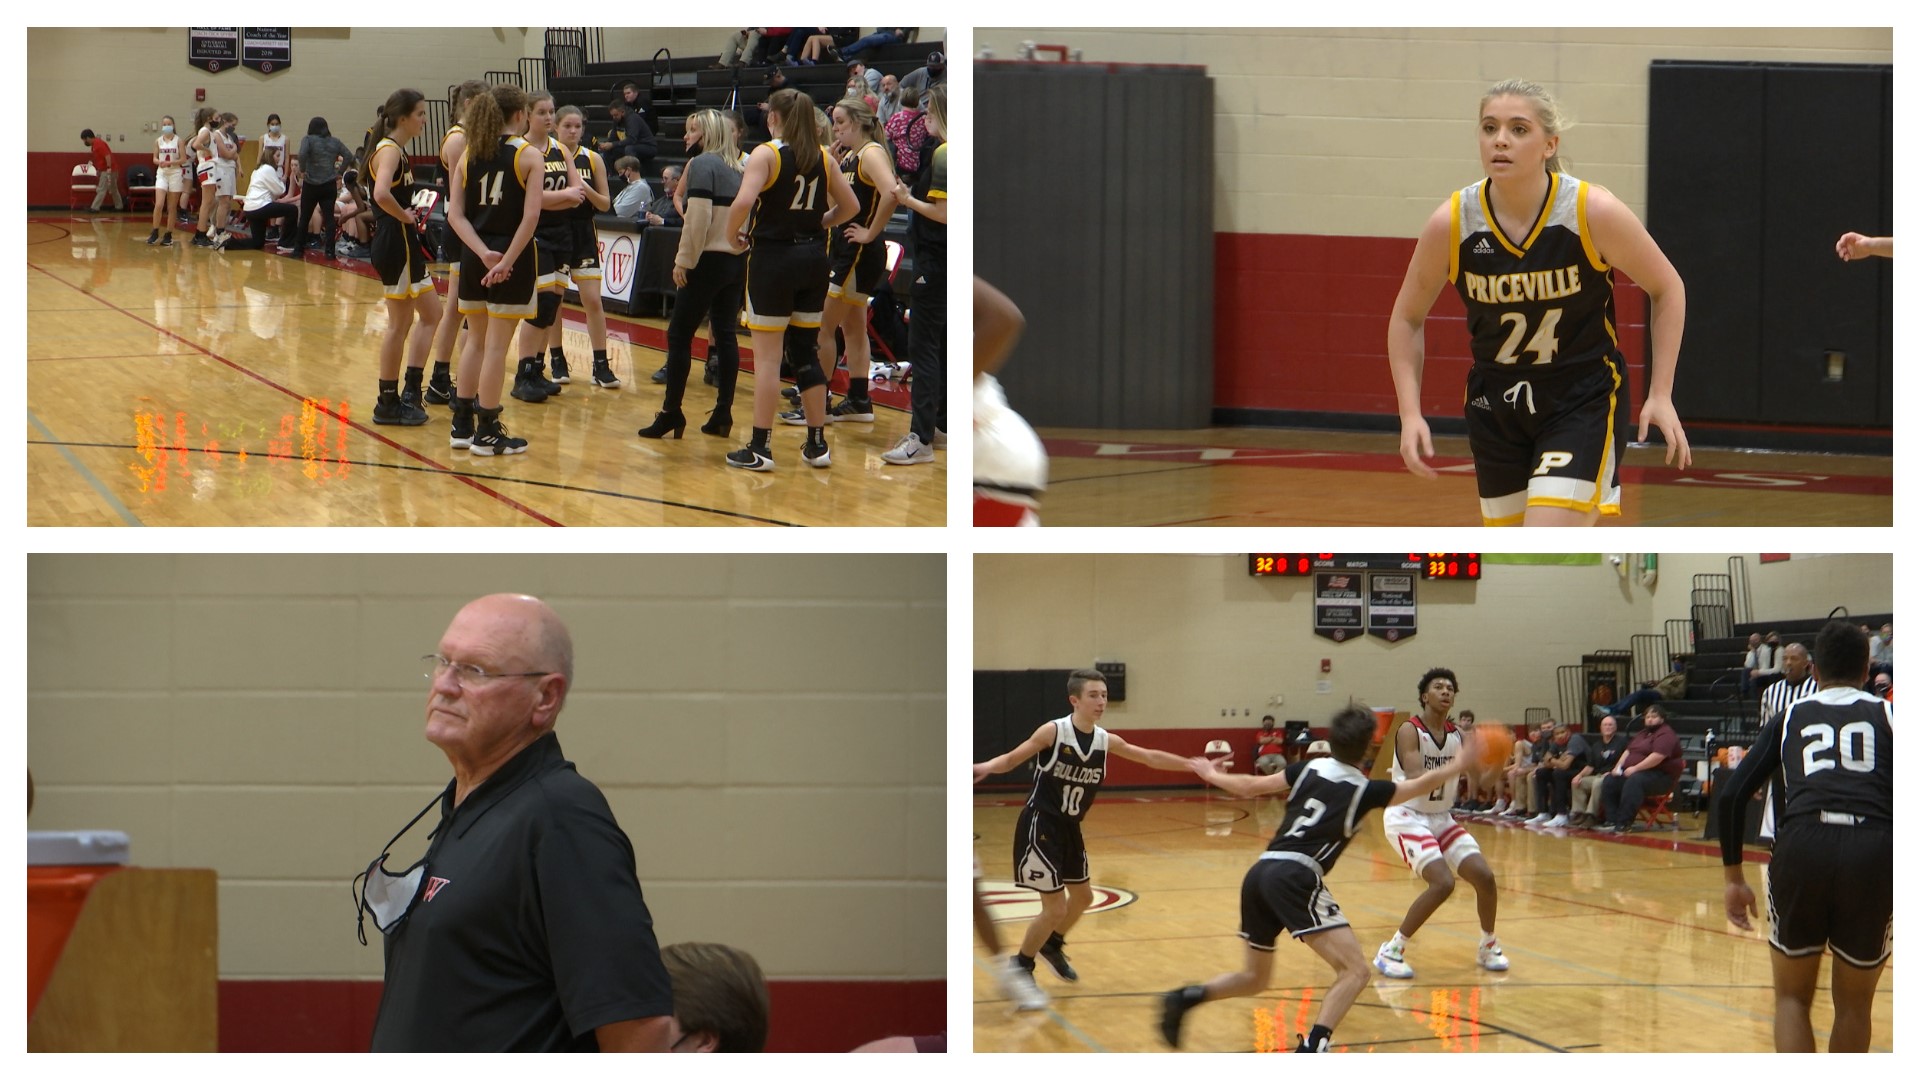 Priceville's Lady Bulldogs cruised to a 70-16 win over WCA; Coach Stapler led the Wildcats to a 61-37 win in boys action